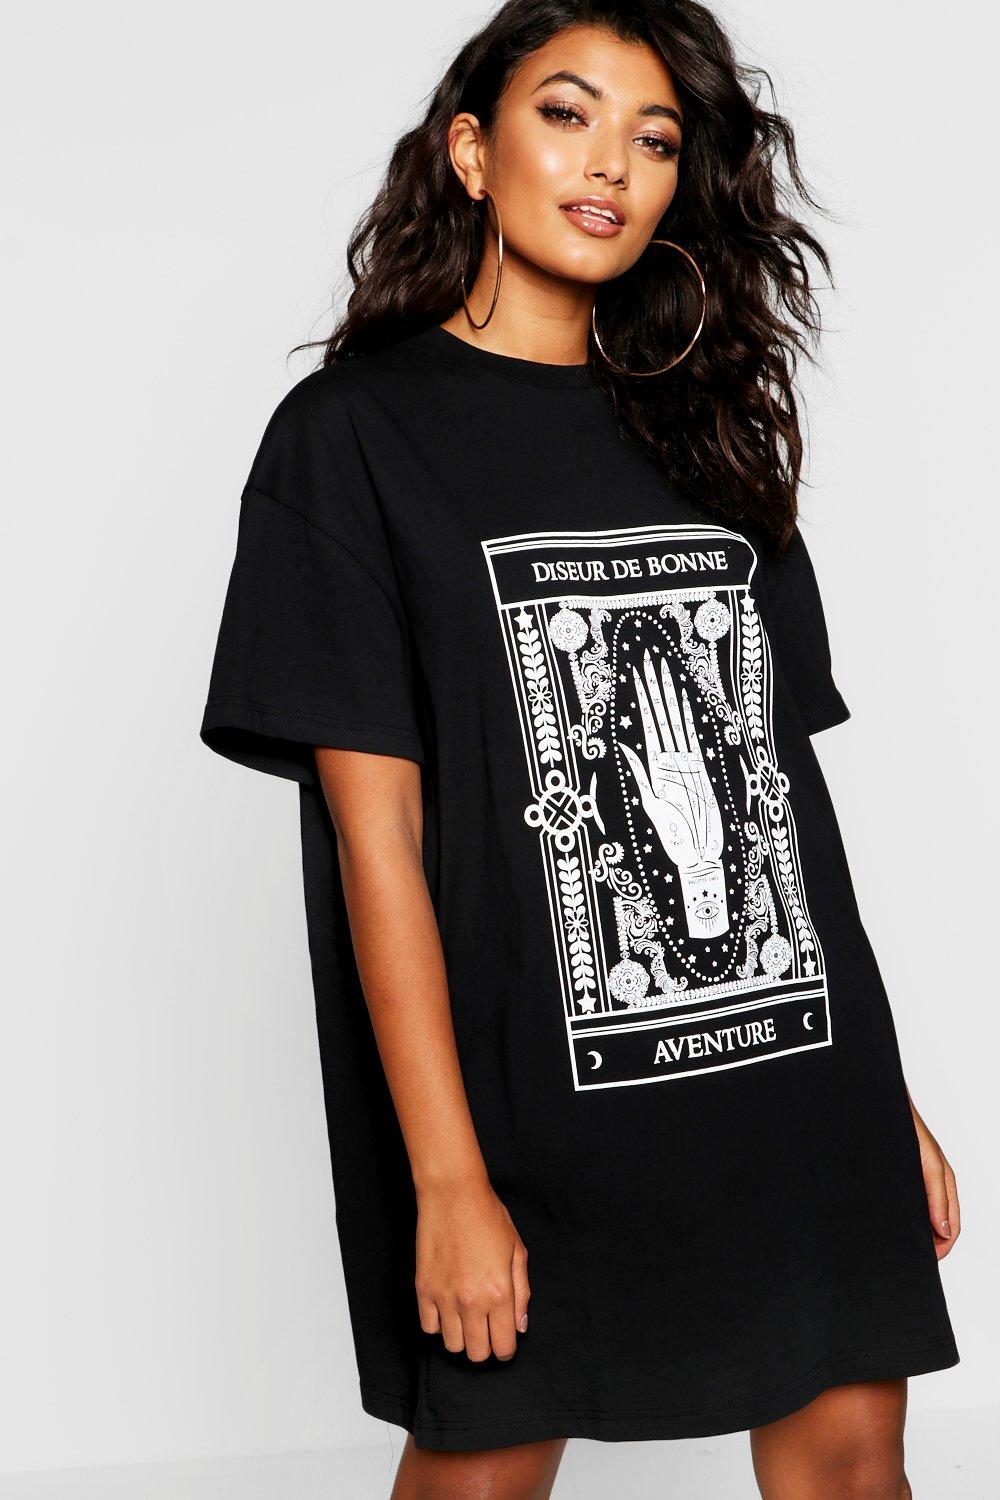 Cool Oversized T Shirts Online Hotsell ...